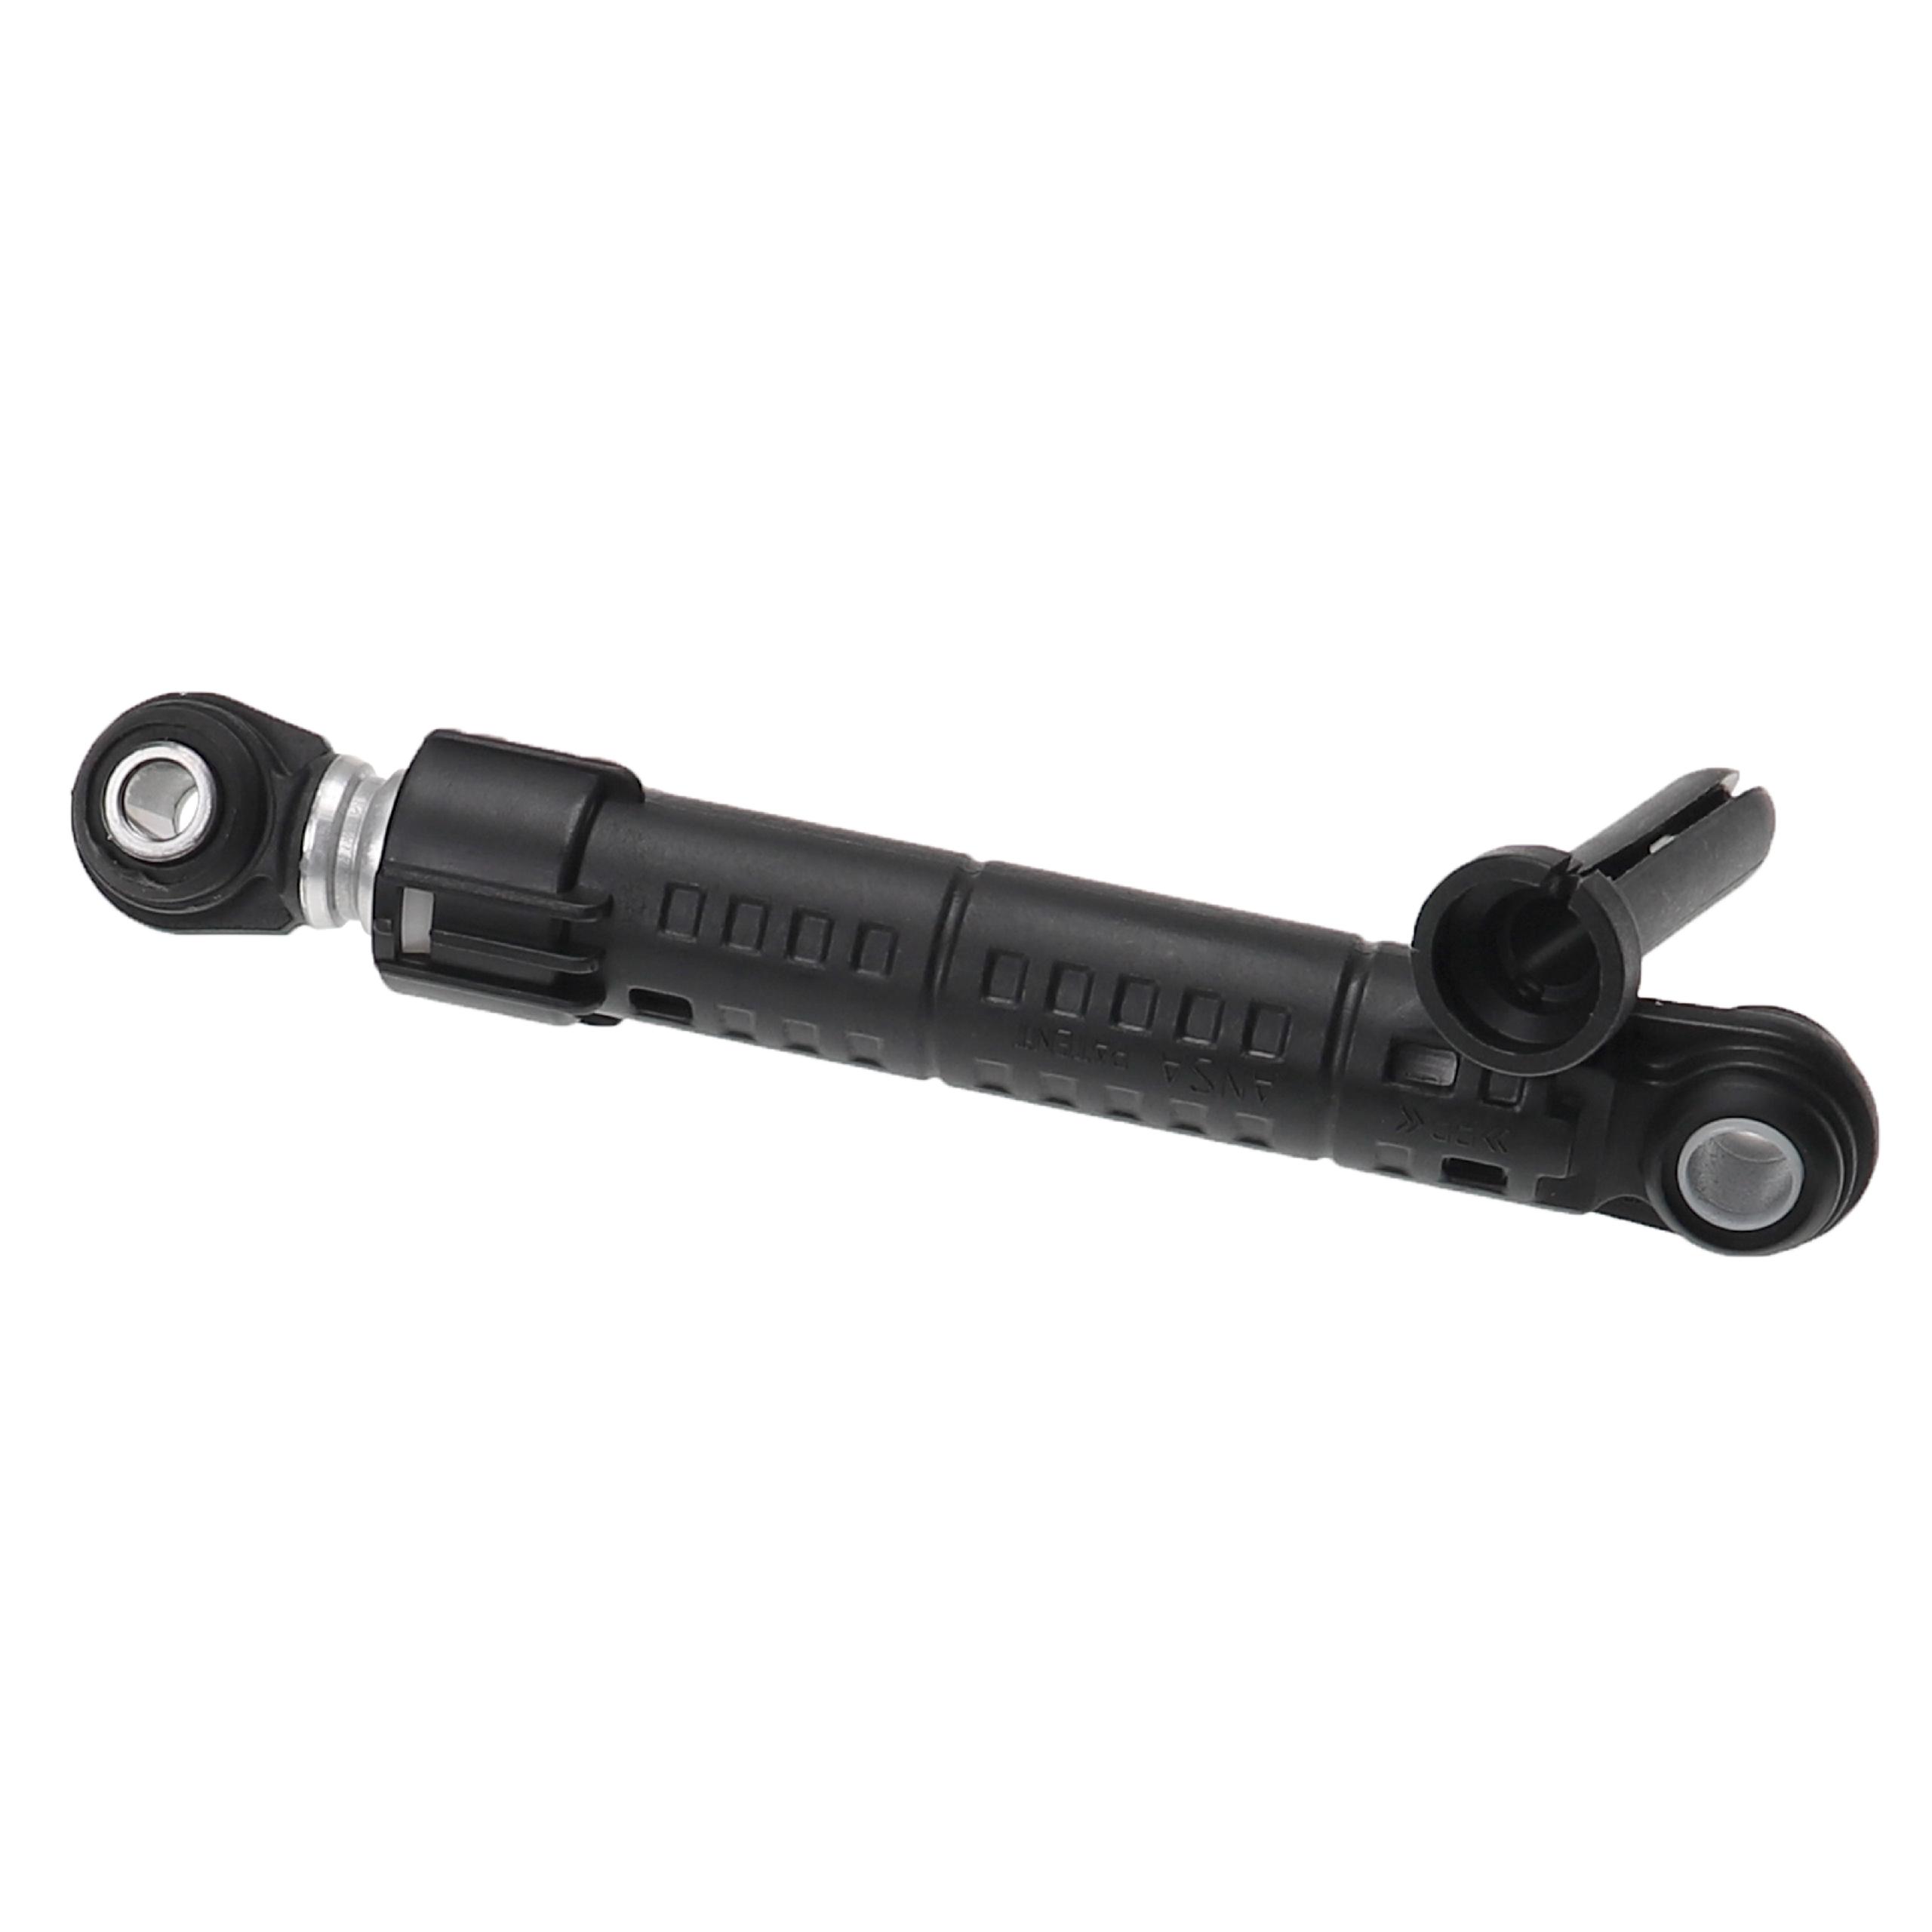 Shock Absorber as Replacement for 00118869 for Washing Machine - 90 N